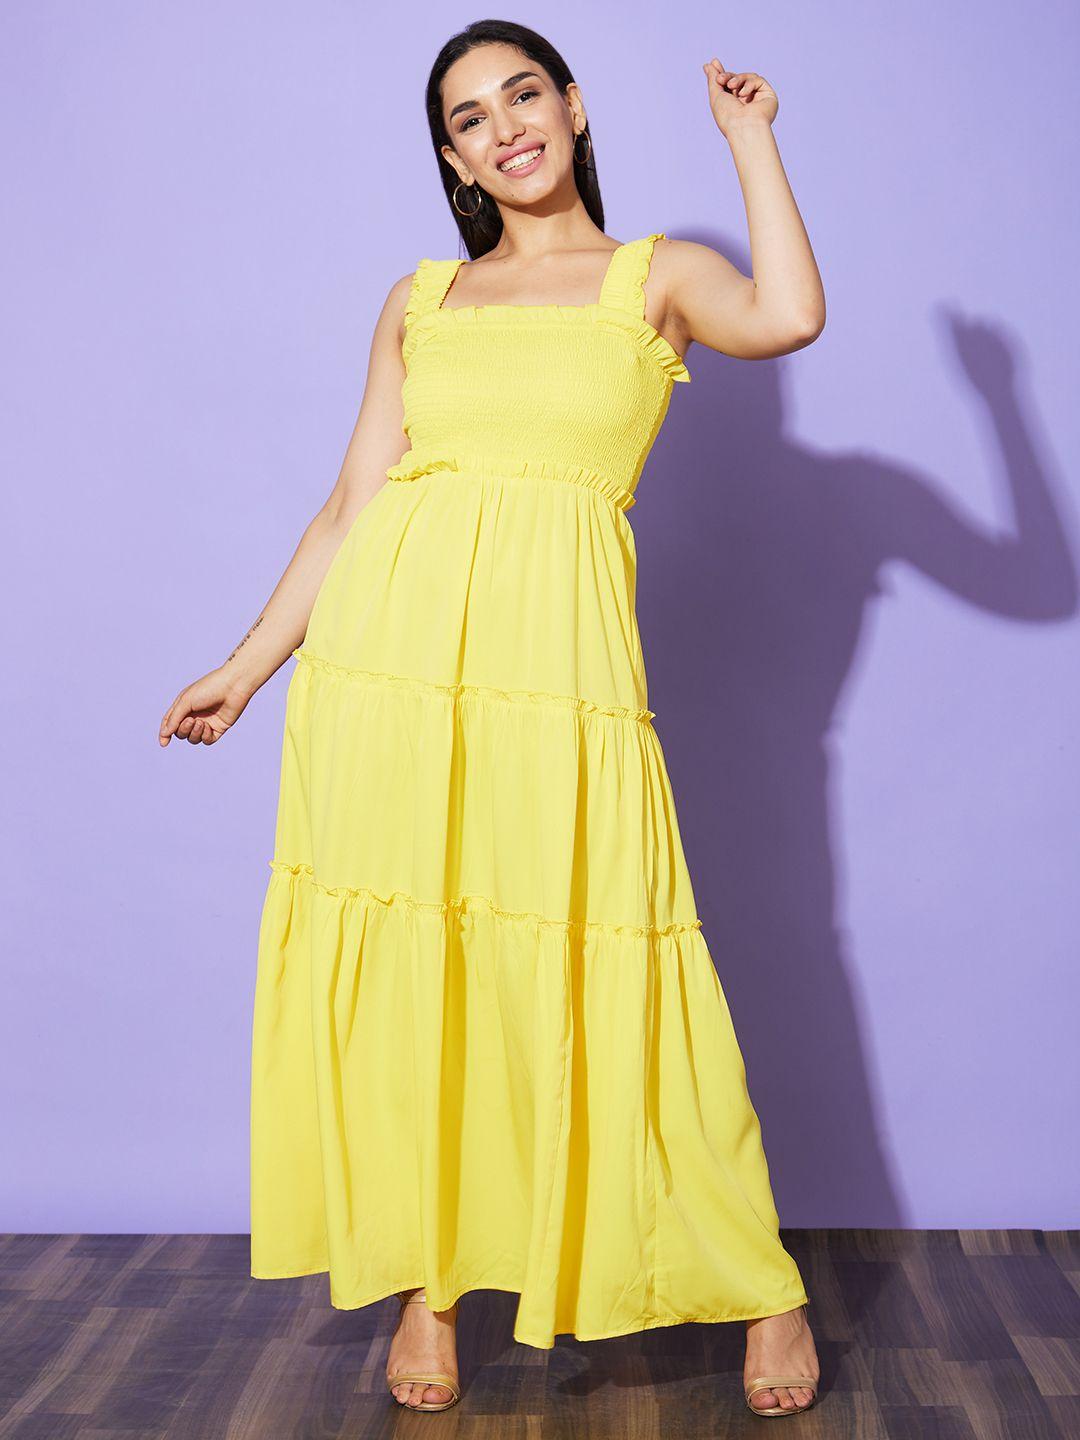 globus yellow georgette shoulder strap tiered maxi dress